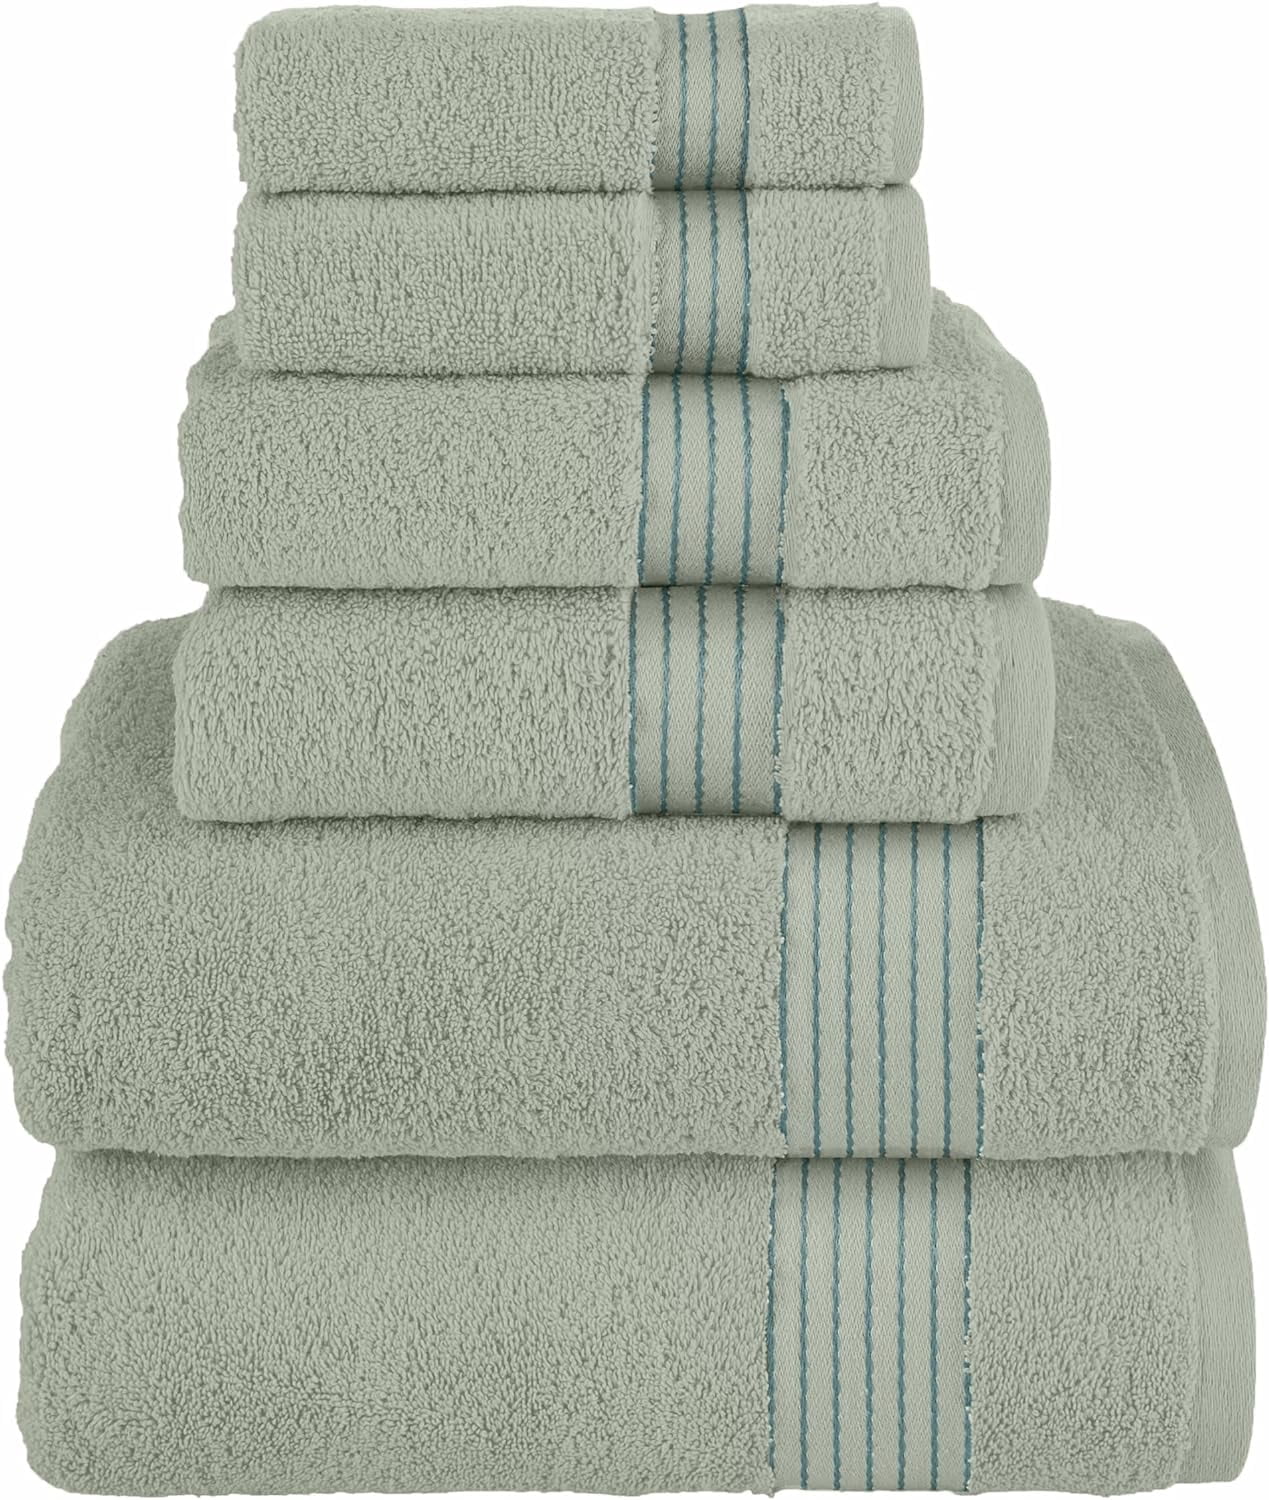 Elegant Comfort Cotton 6-Piece Towel Set, Includes 2 Washcloths, 2 Hand Towels and 2 Bath Towels, 100% Turkish Cotton - Highly Absorbent and Super